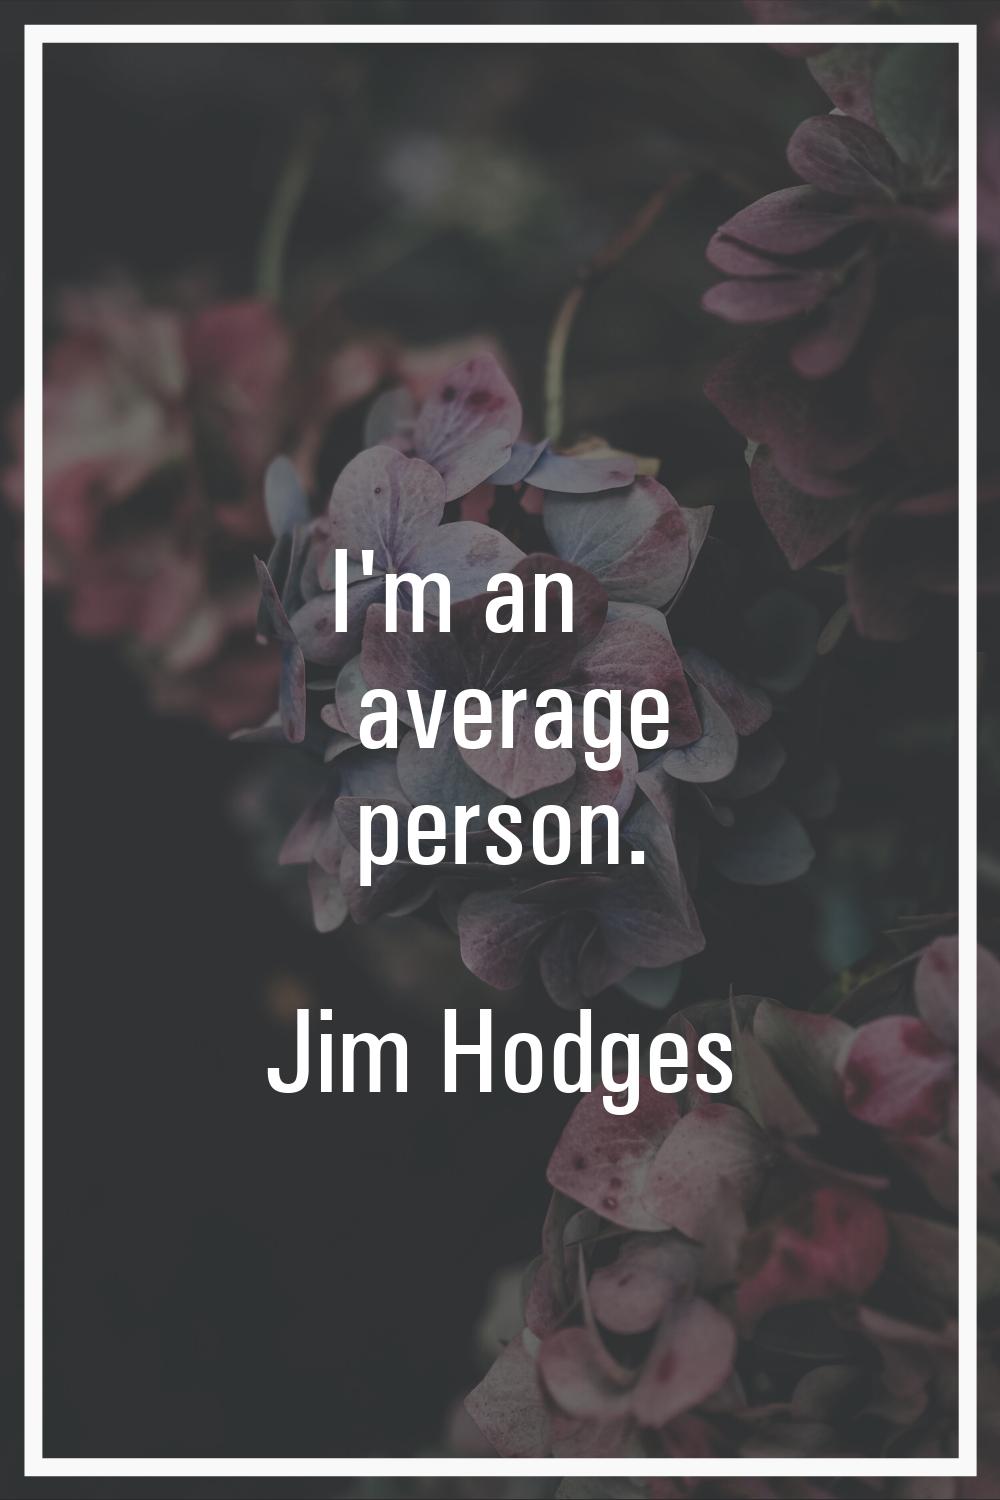 I'm an average person.